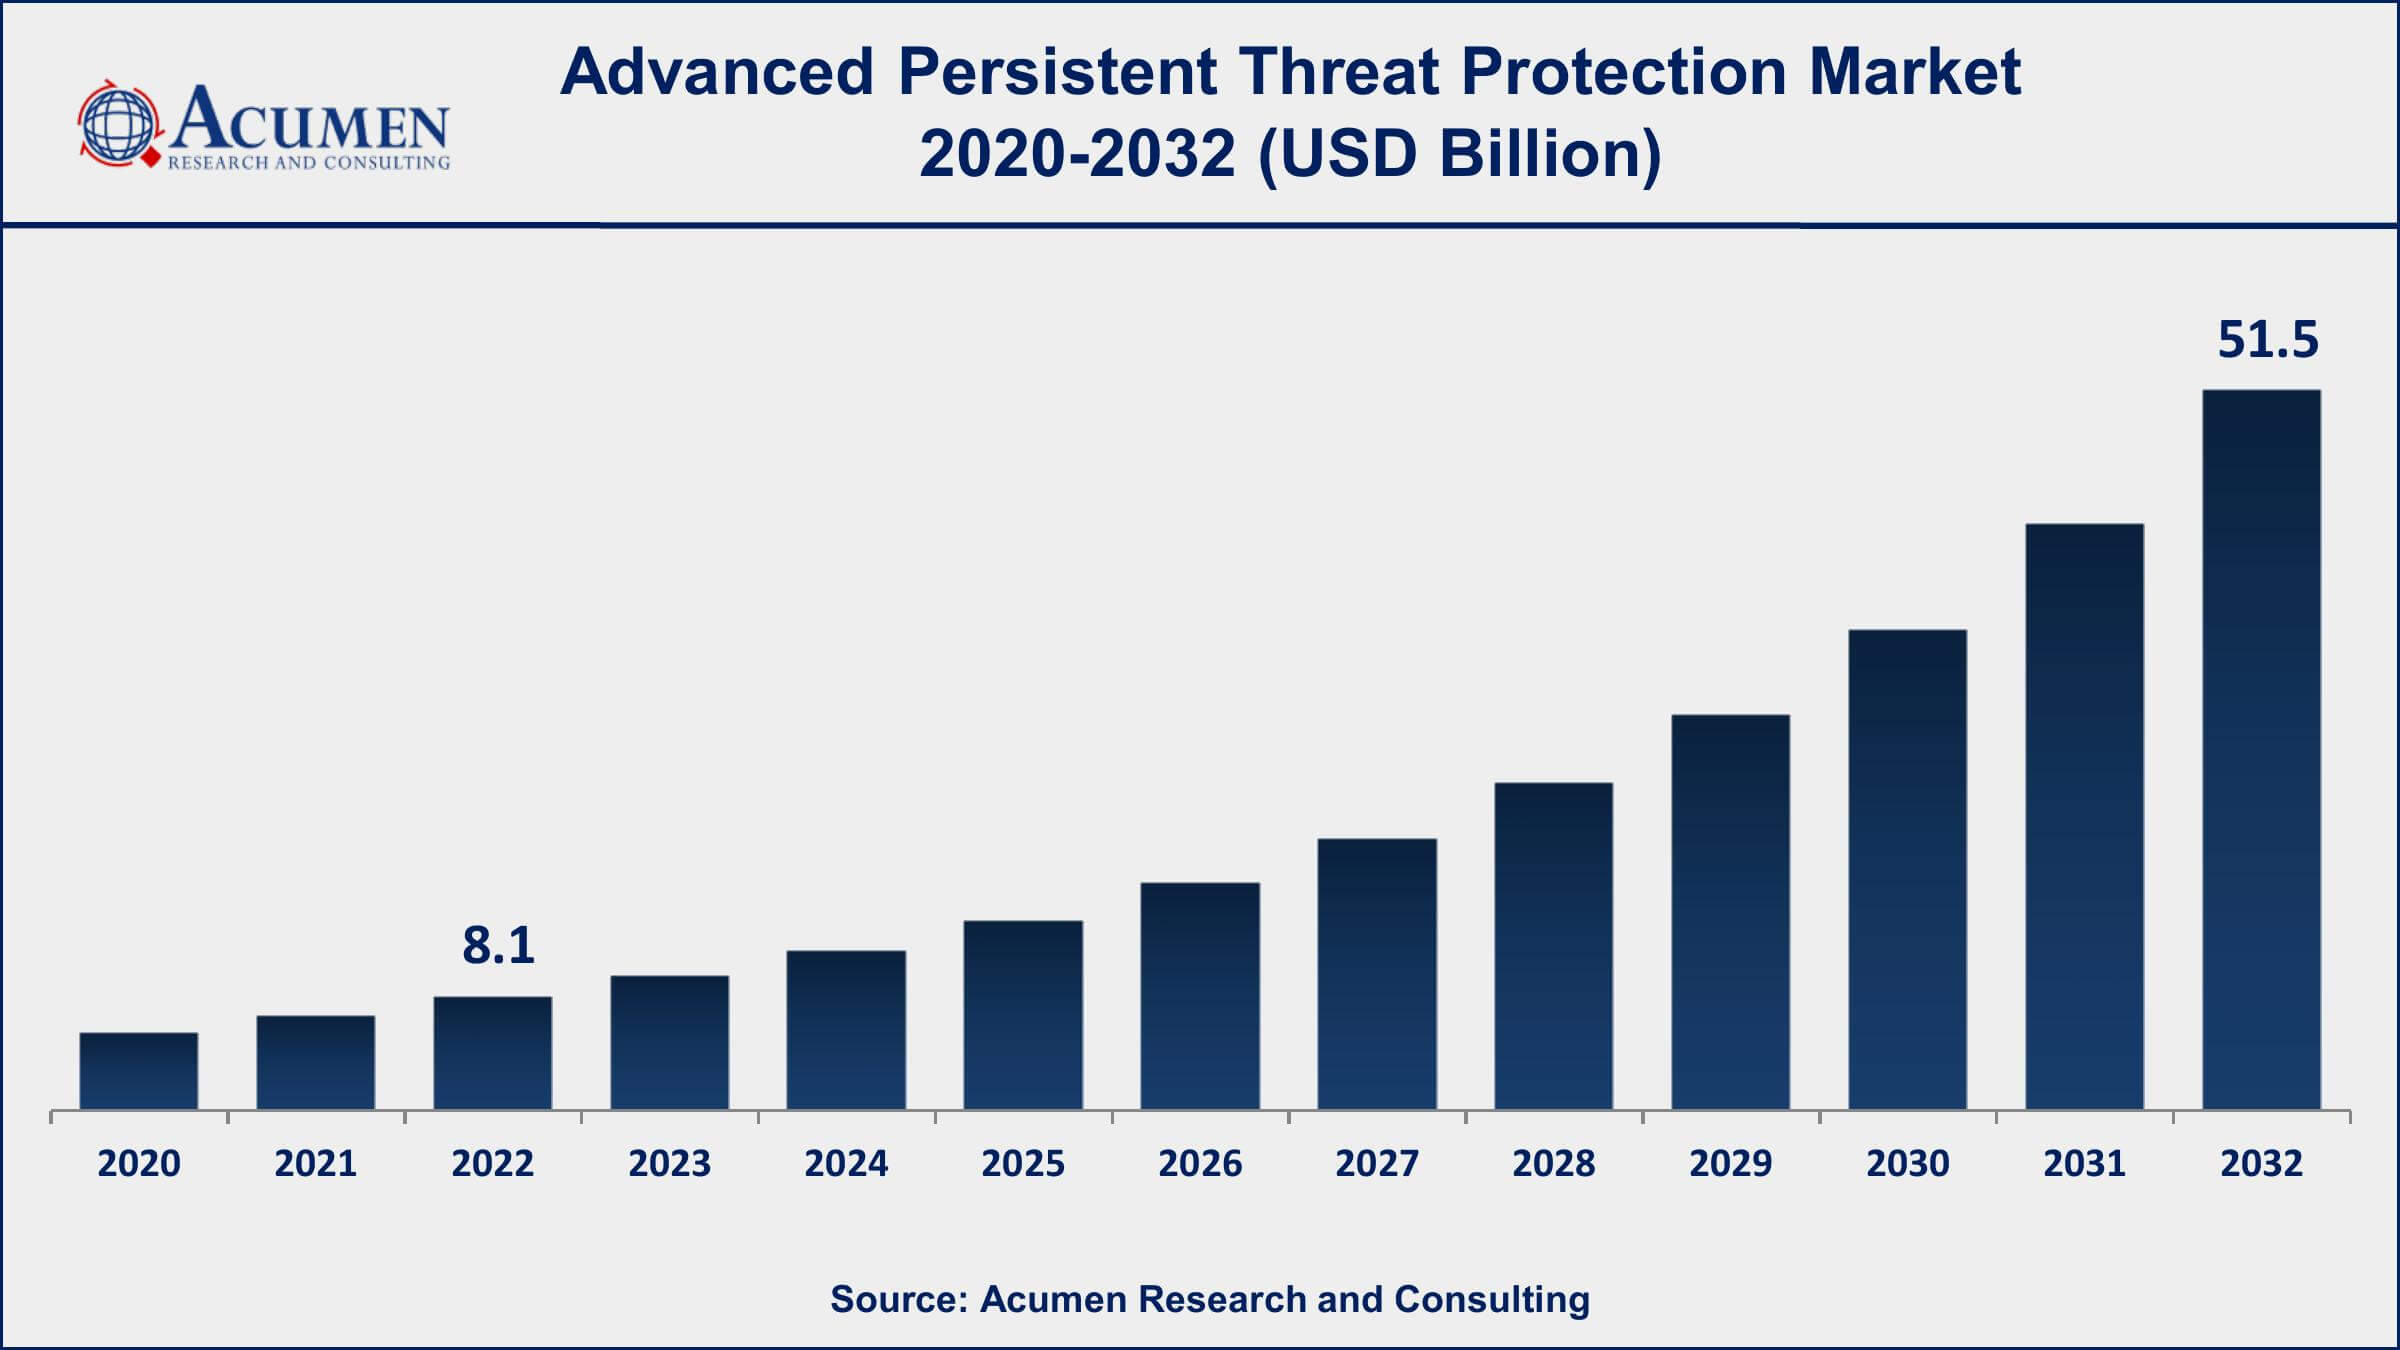 Advanced Persistent Threat Protection Market Dynamics